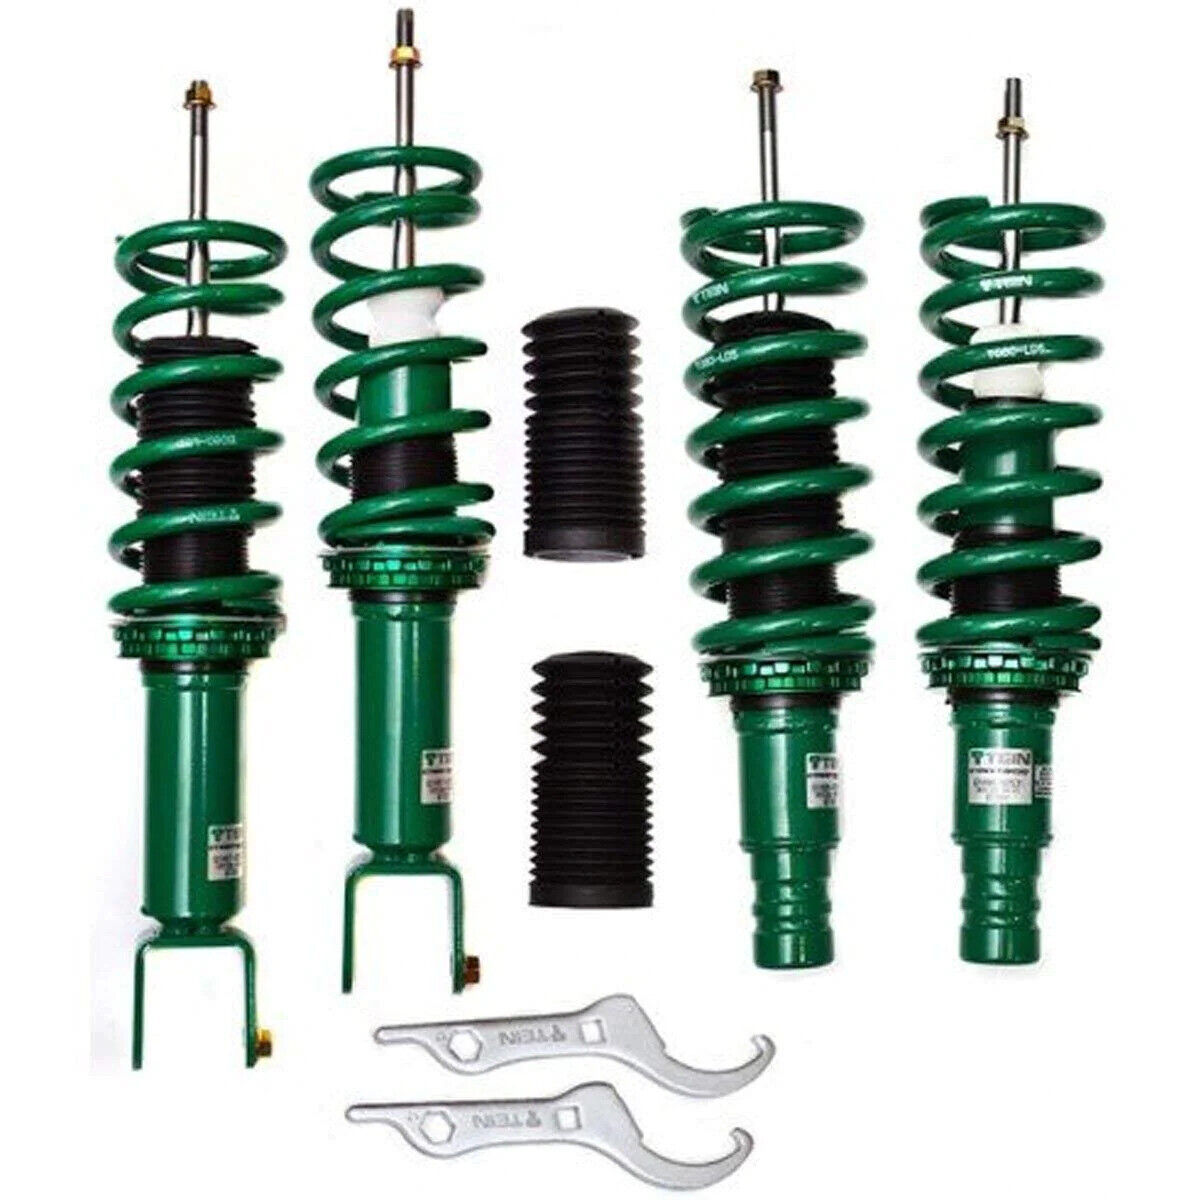 Tein GSM74-81SS2 for 06-15 Mazda MX-5 Miata (NCEC) Street Basis Z Coilovers